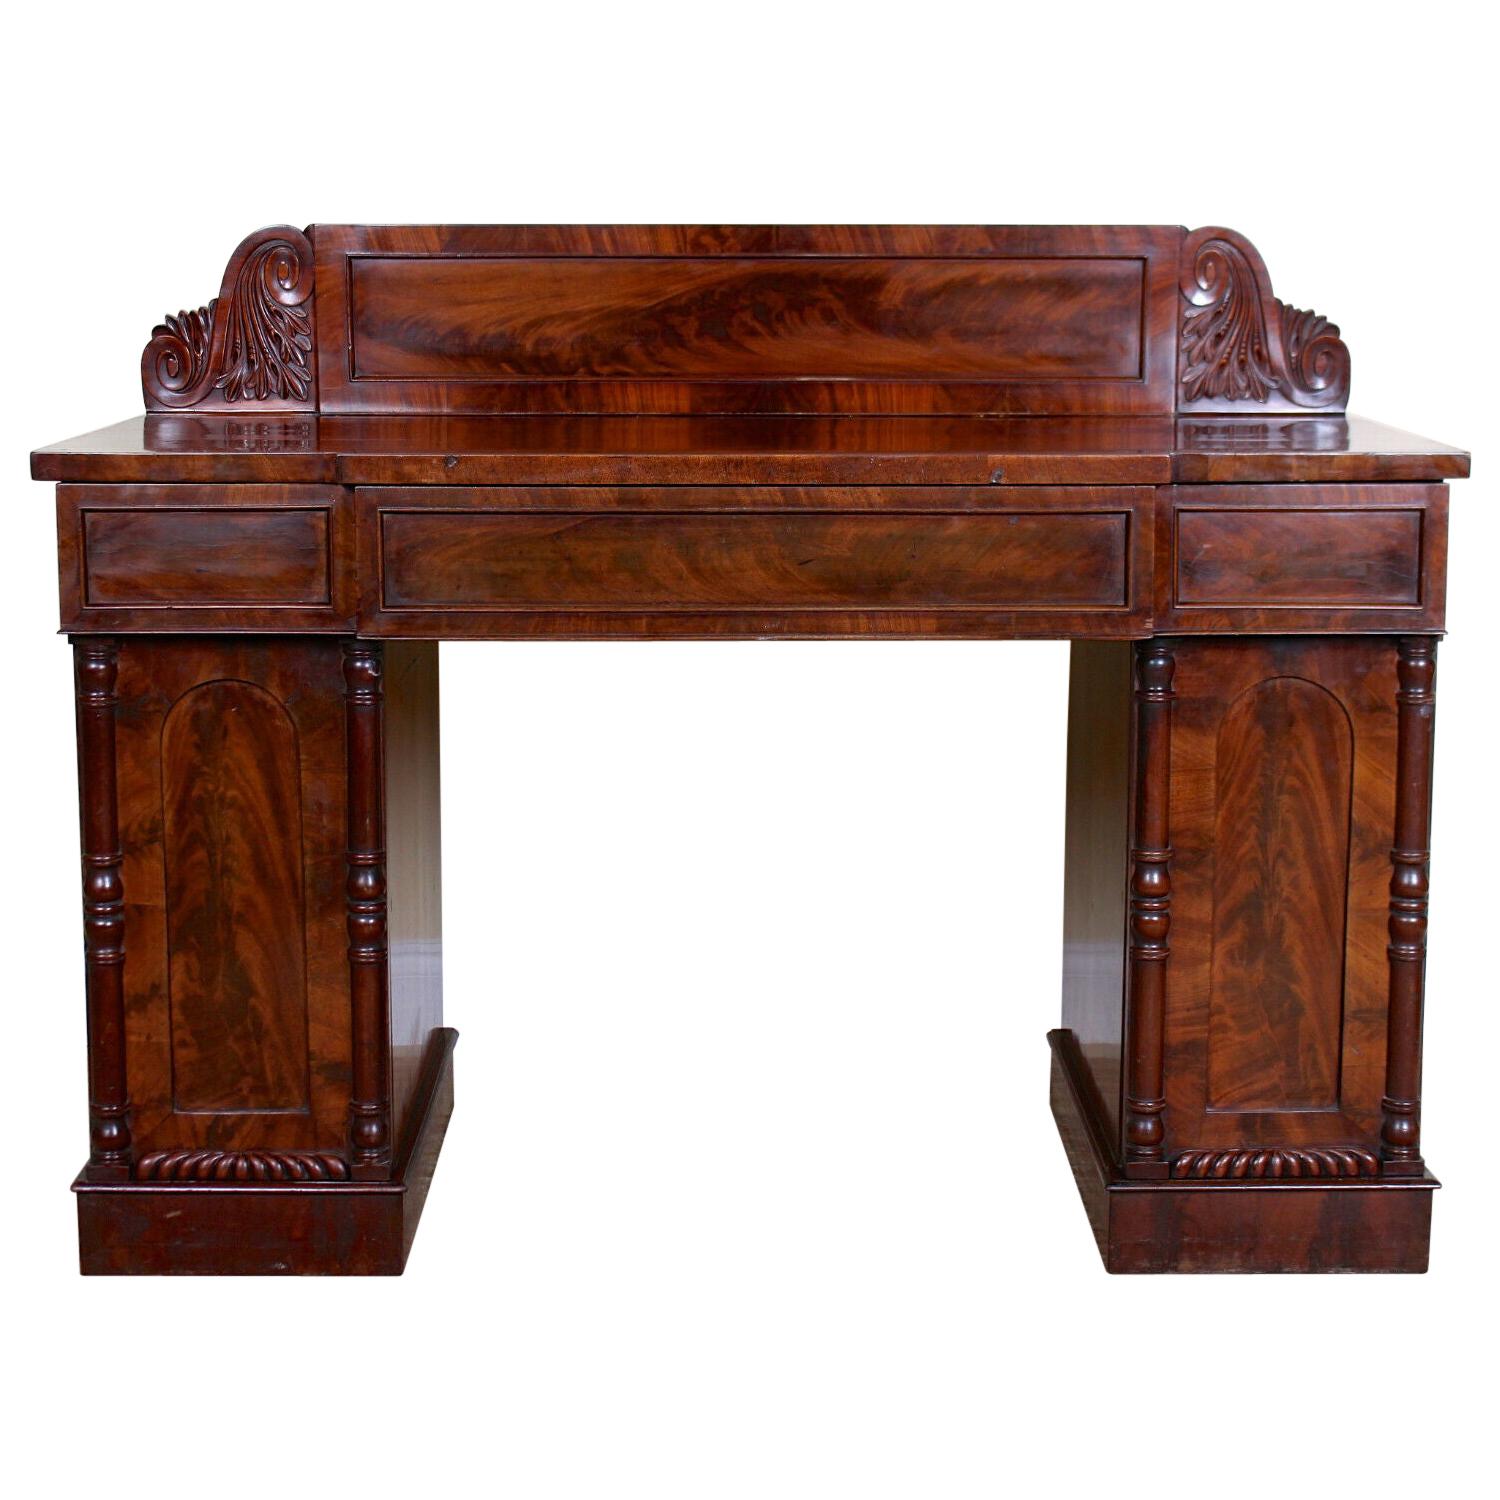 English Regency Mahogany Sideboard Early 19th Century Twin Pedestal Credenza For Sale